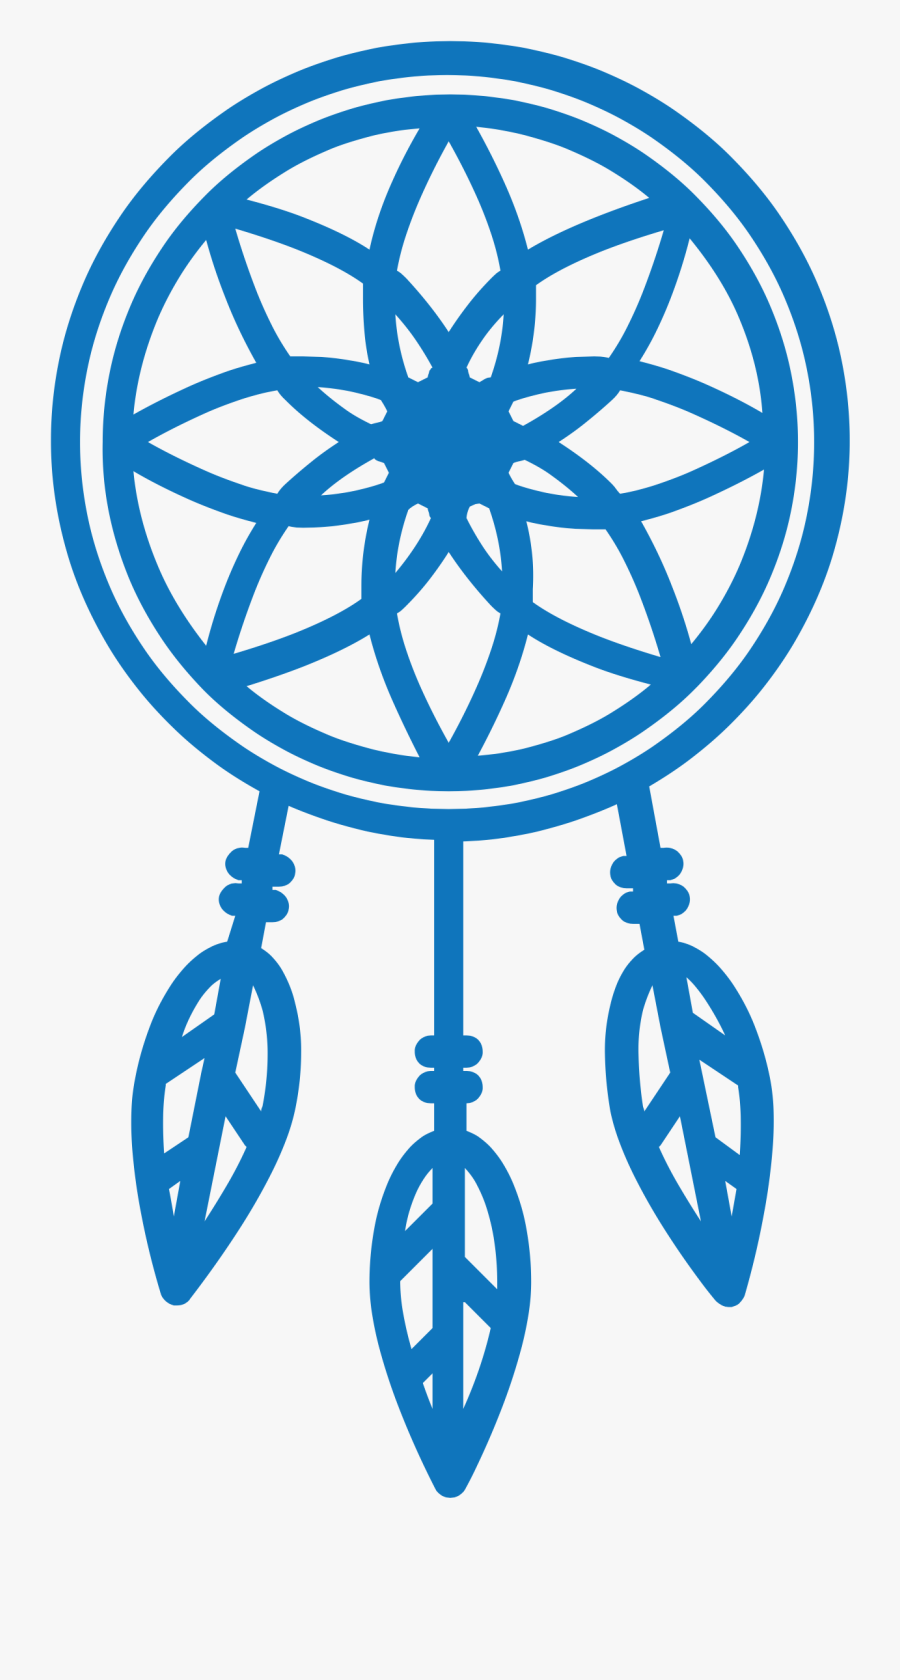 Transparent Dream Catcher Silhouette Png - Physical Education And Health Logo, Transparent Clipart